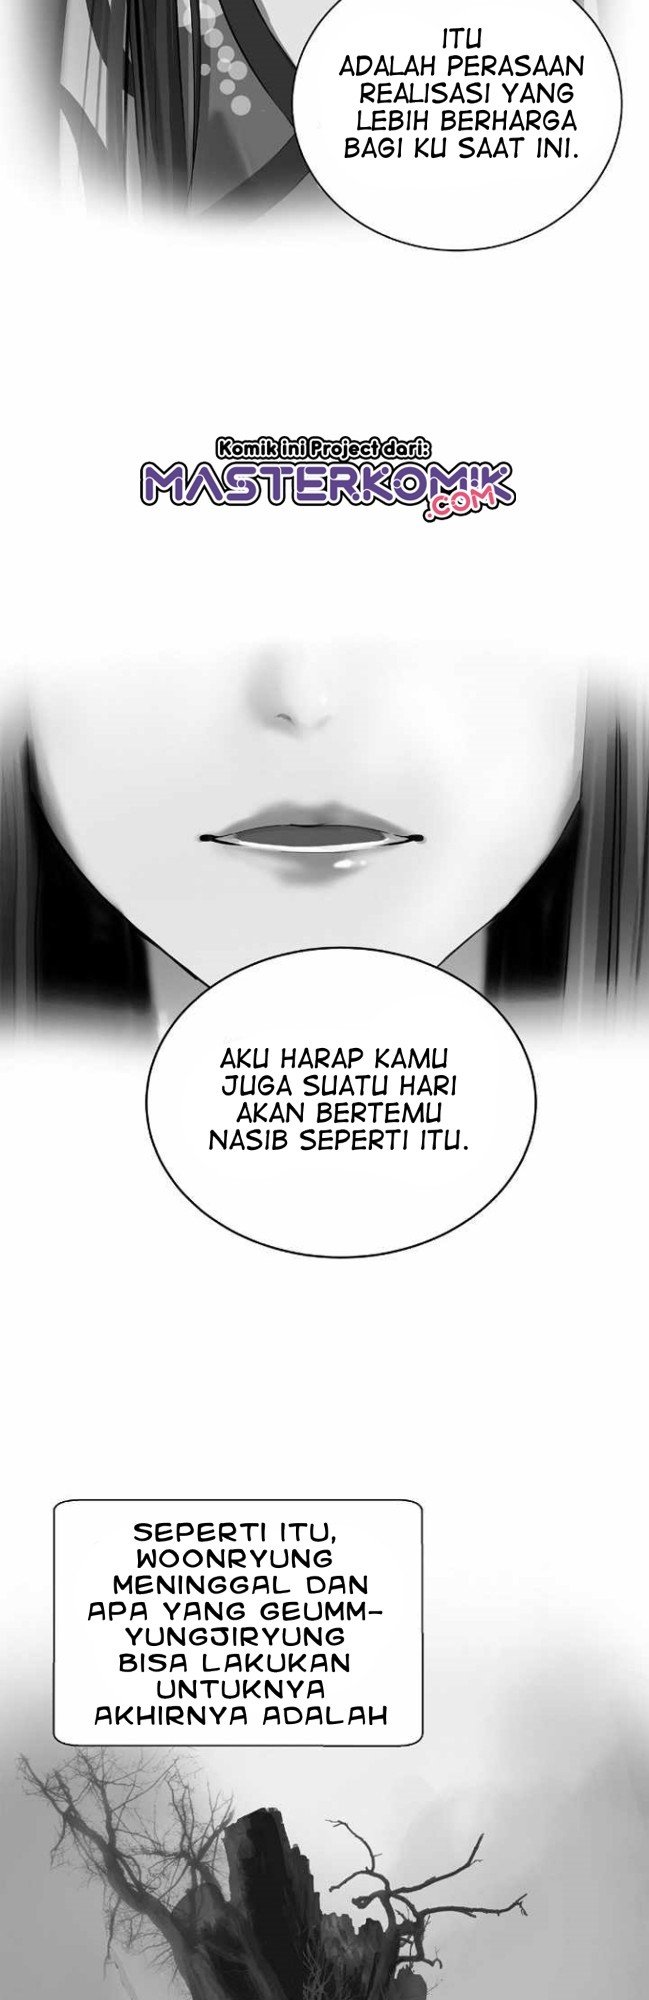 Cystic Story Chapter 37